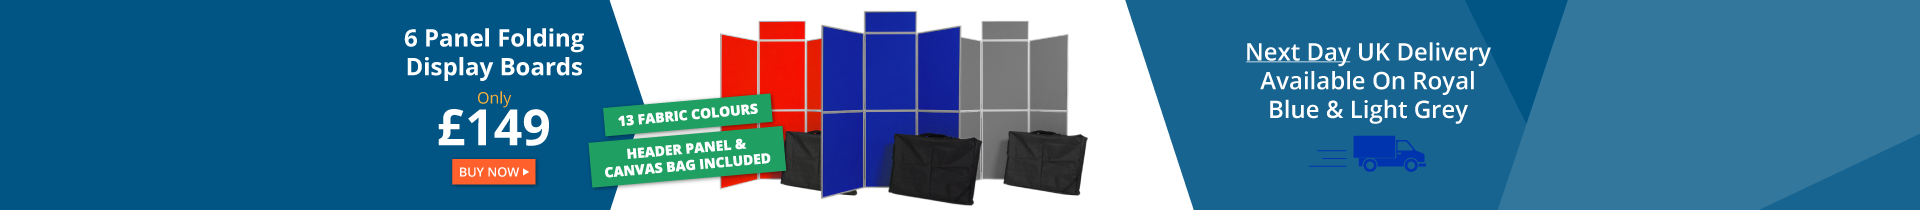 https://www.xldisplays.co.uk/products/6-panel-folding-display-board-including-header-and-carry-bag.html